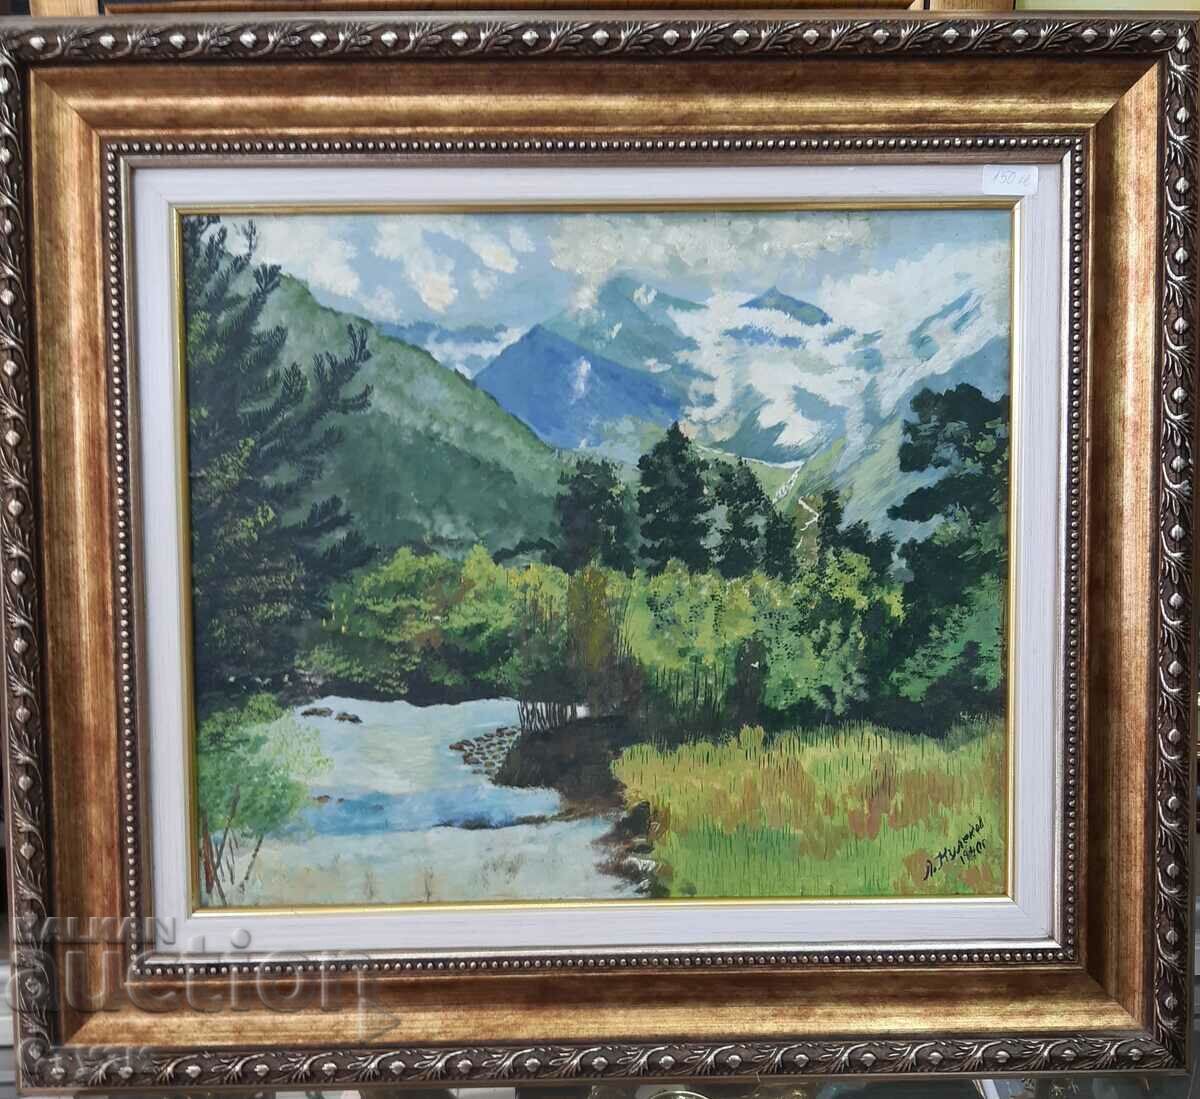 Painting by L. Kulekov "Mountain landscape", oil, 30 x 35.5 cm